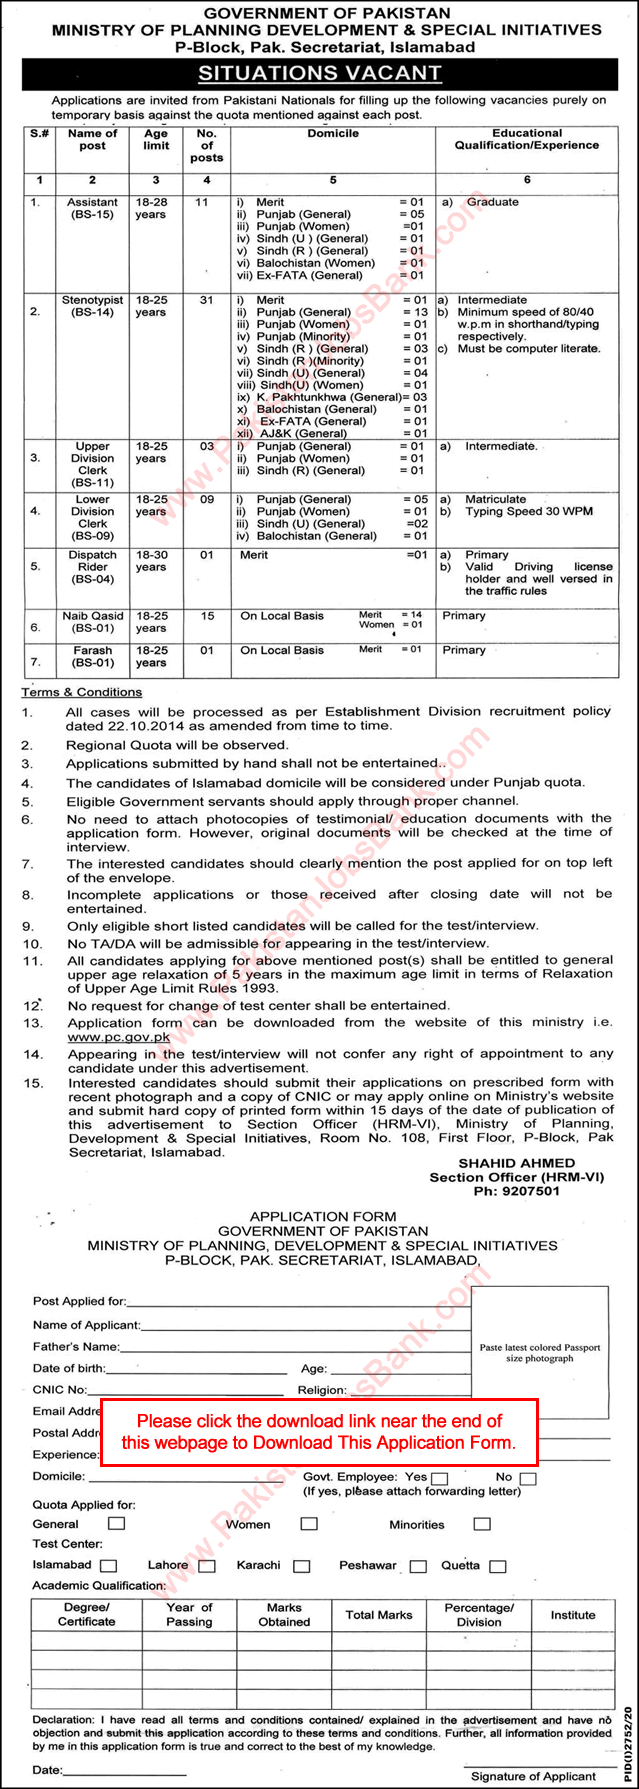 Ministry of Planning Development and Special Initiatives Jobs 2020 November Islamabad Application Form Download Latest